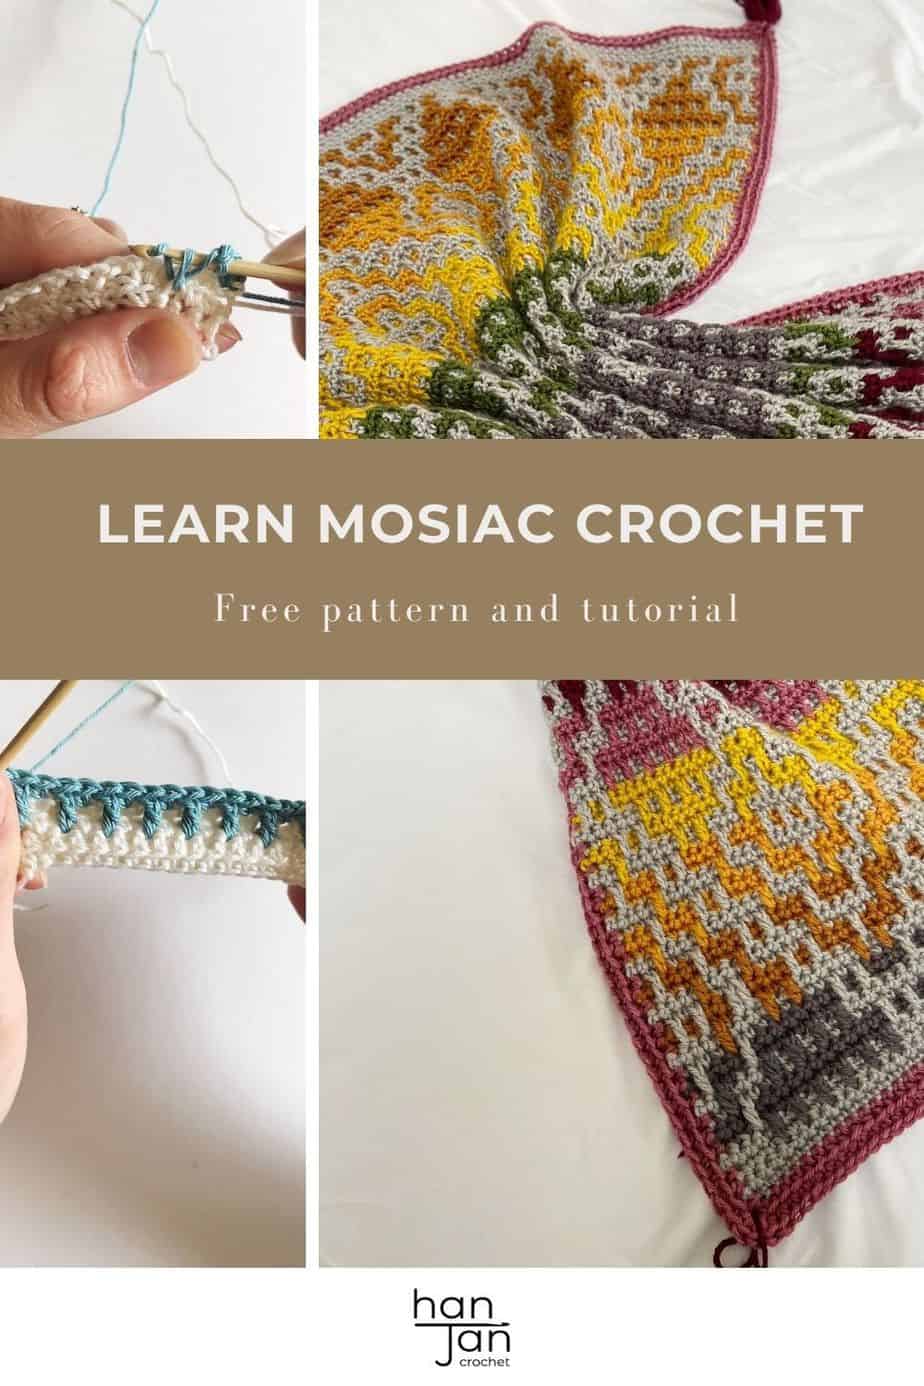 example of mosaic crochet blanket and images of hands crocheting mosaic crochet 